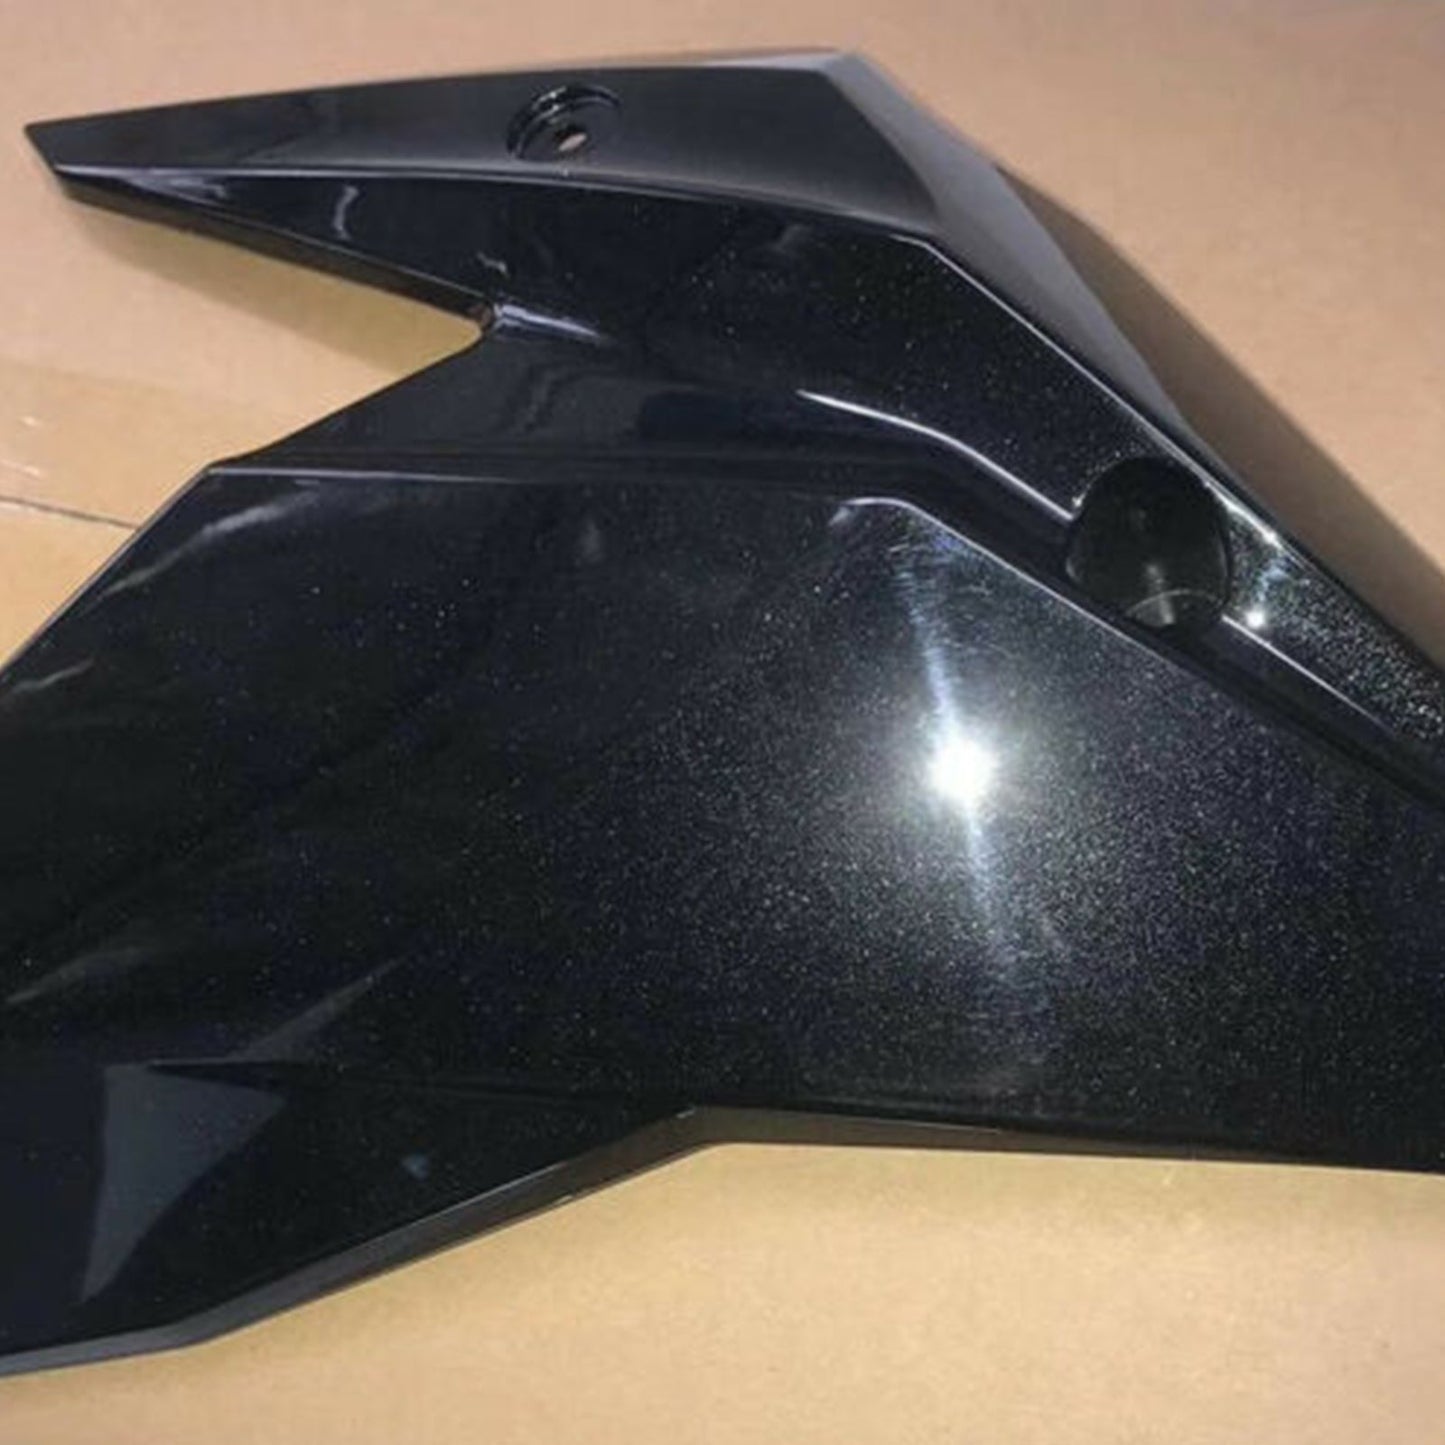 Engine Panel Belly Pan Lower Cowling Cover Fairing for Kawasaki Z400 2018-2020